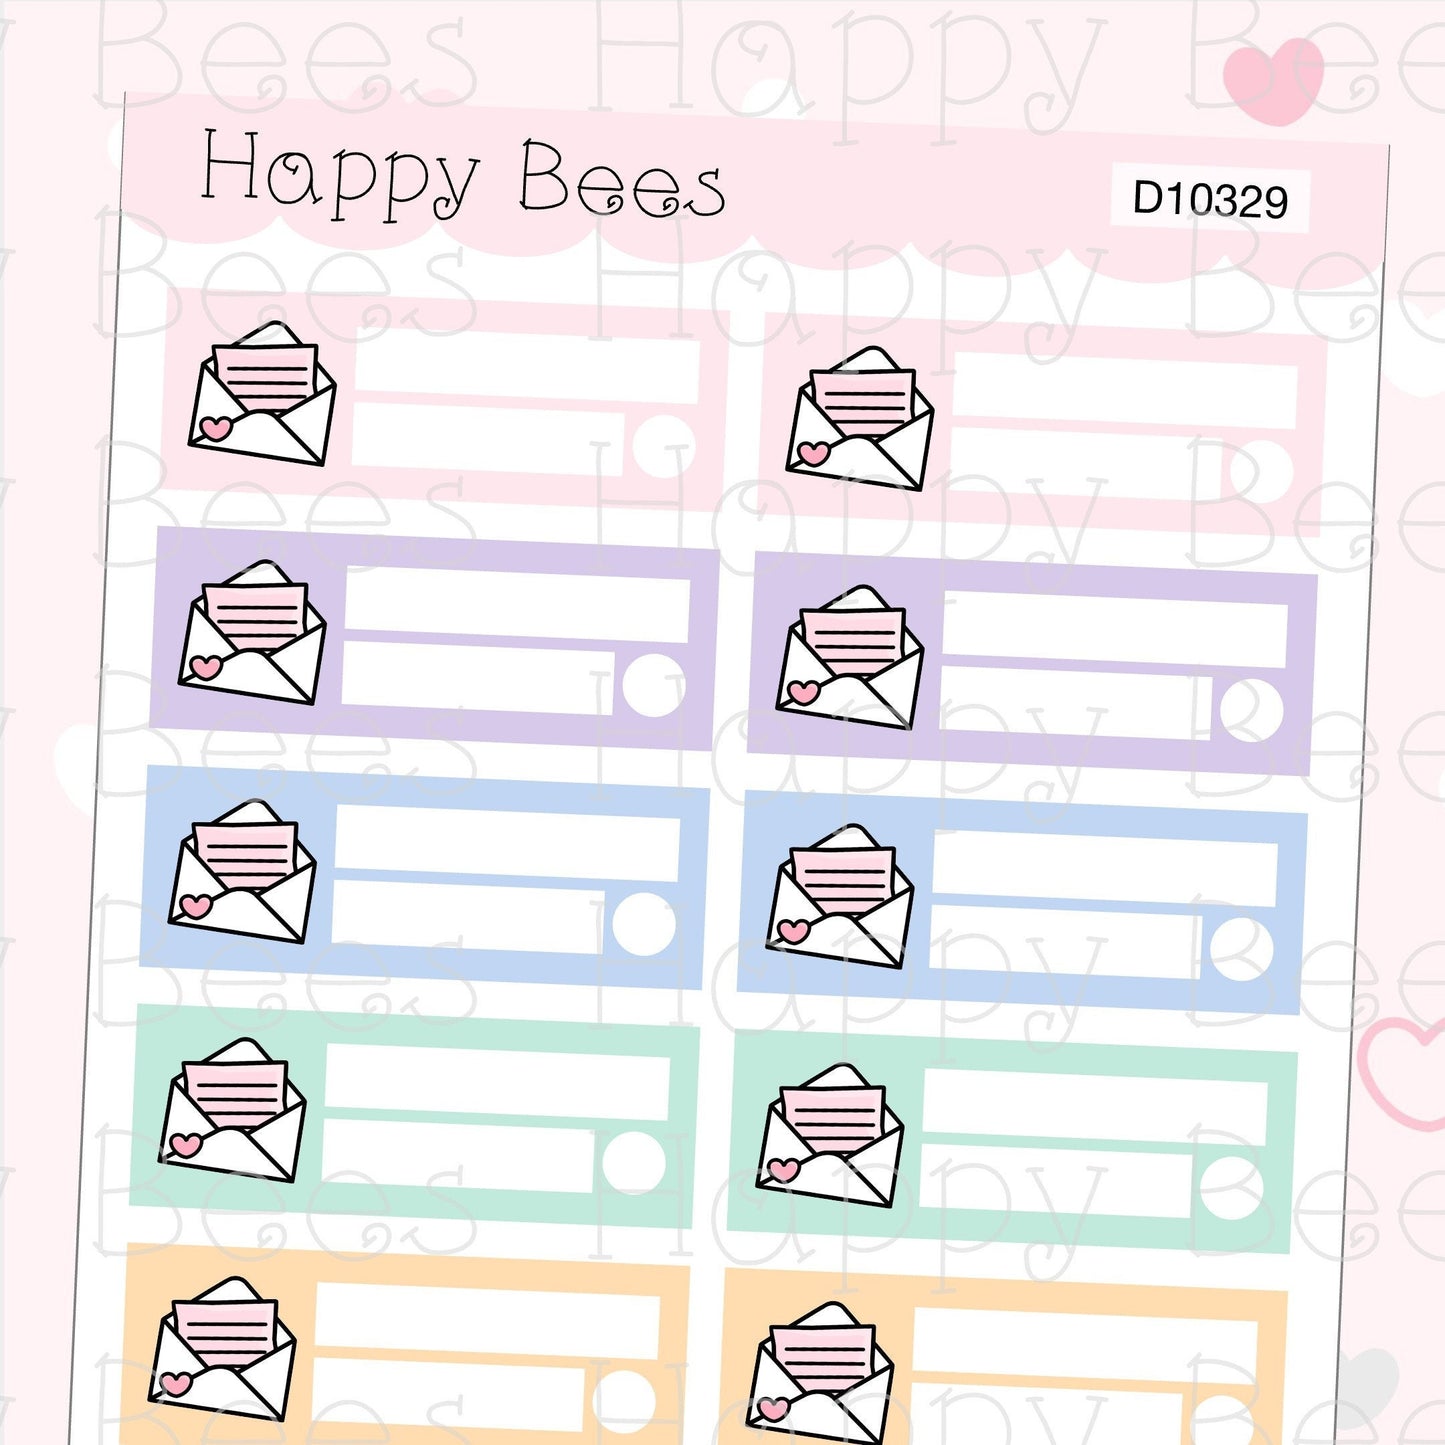 Bill Due Boxes Vol. 2 - Functional Finance Cute Doodles Vertical Planner Stickers D10329